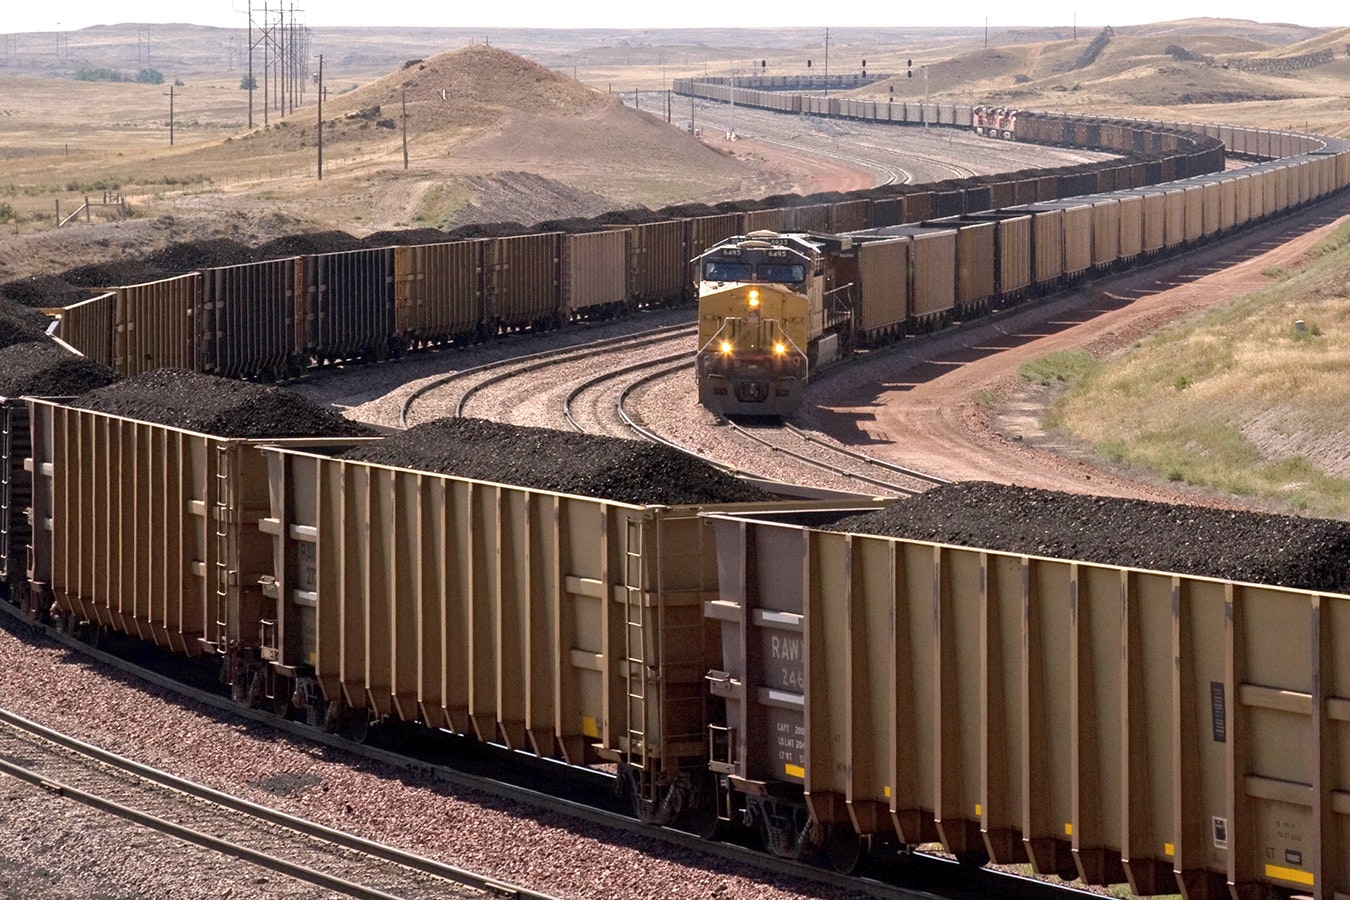 Long coal trains pull in and out of the North Antelope Rochelle mine in Campbell County, Wyoming.